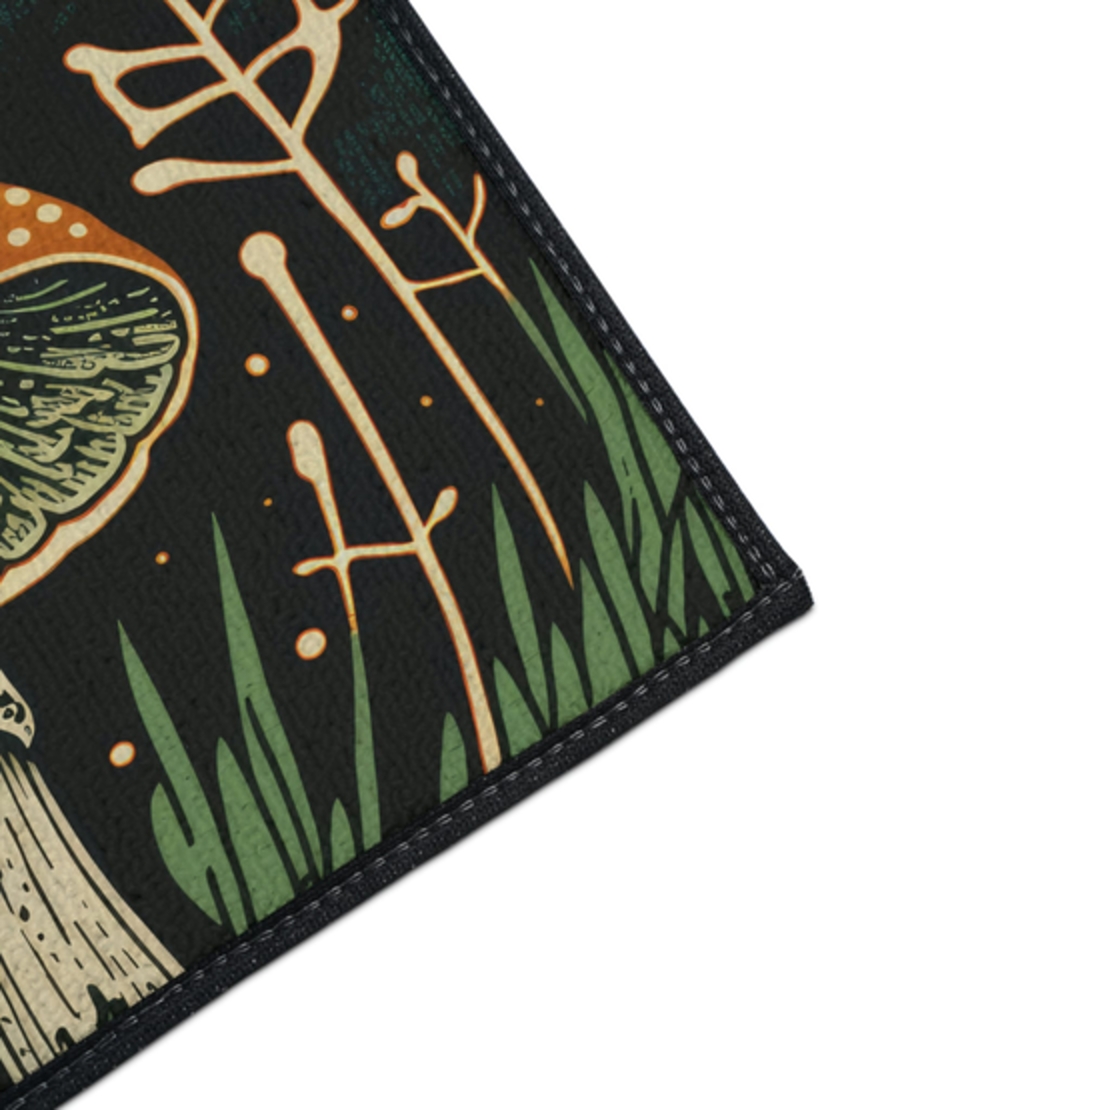 Floor Mat - Forest Mushroom Design - Eco-Friendly and Durable - Fungifly